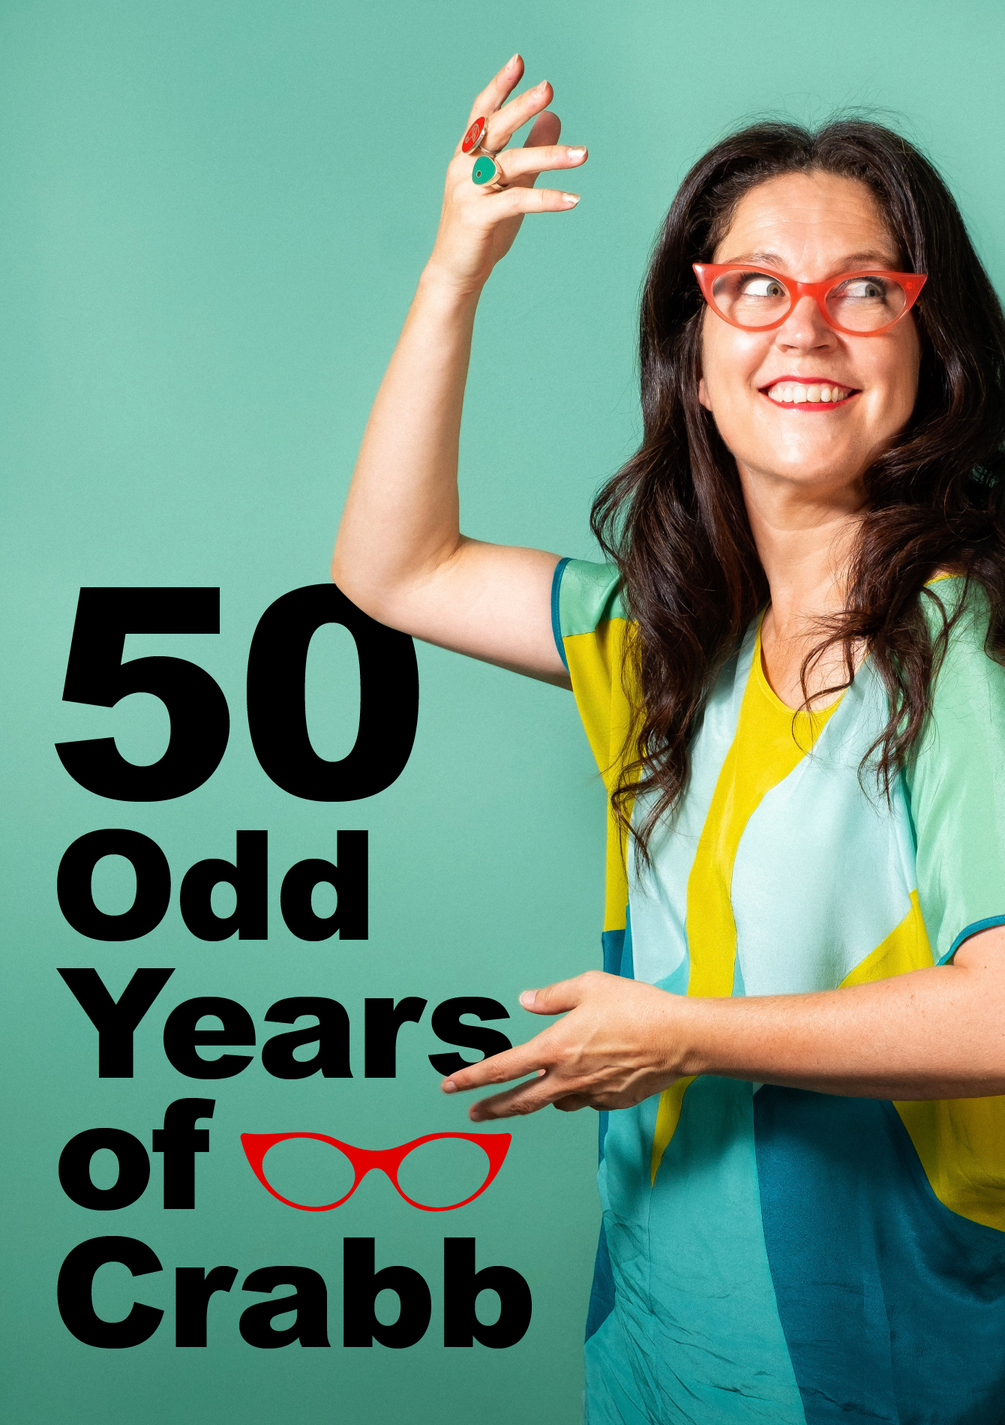 Poster Image of Annabelle Crabb for her Show 50 Odd Years of Crabb